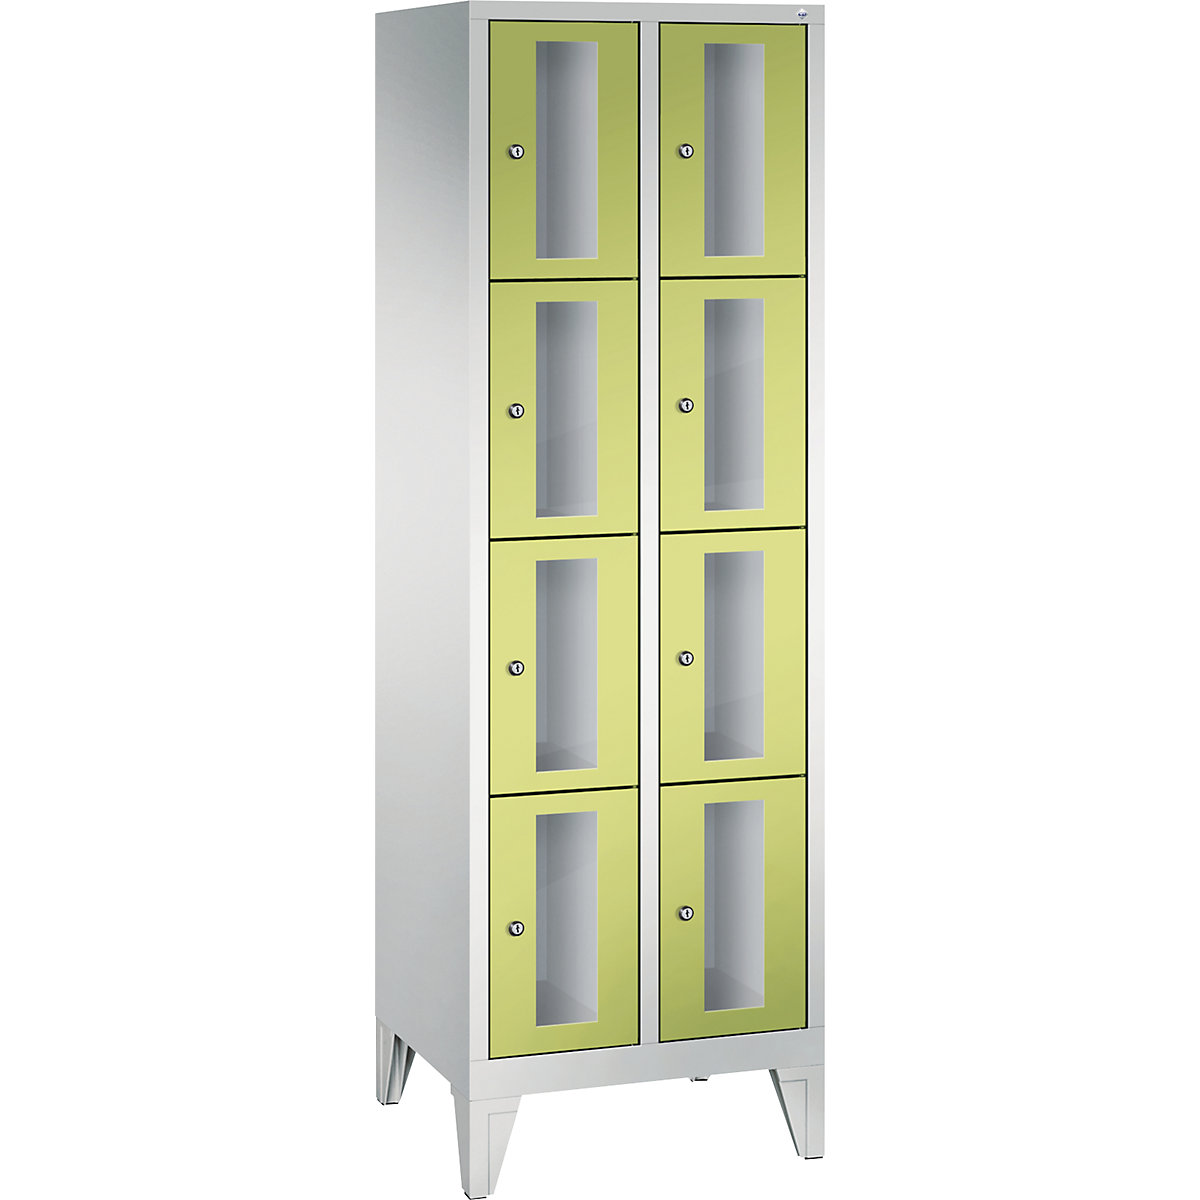 C+P – CLASSIC locker unit, compartment height 375 mm, with feet, 8 compartments, width 610 mm, viridian green door